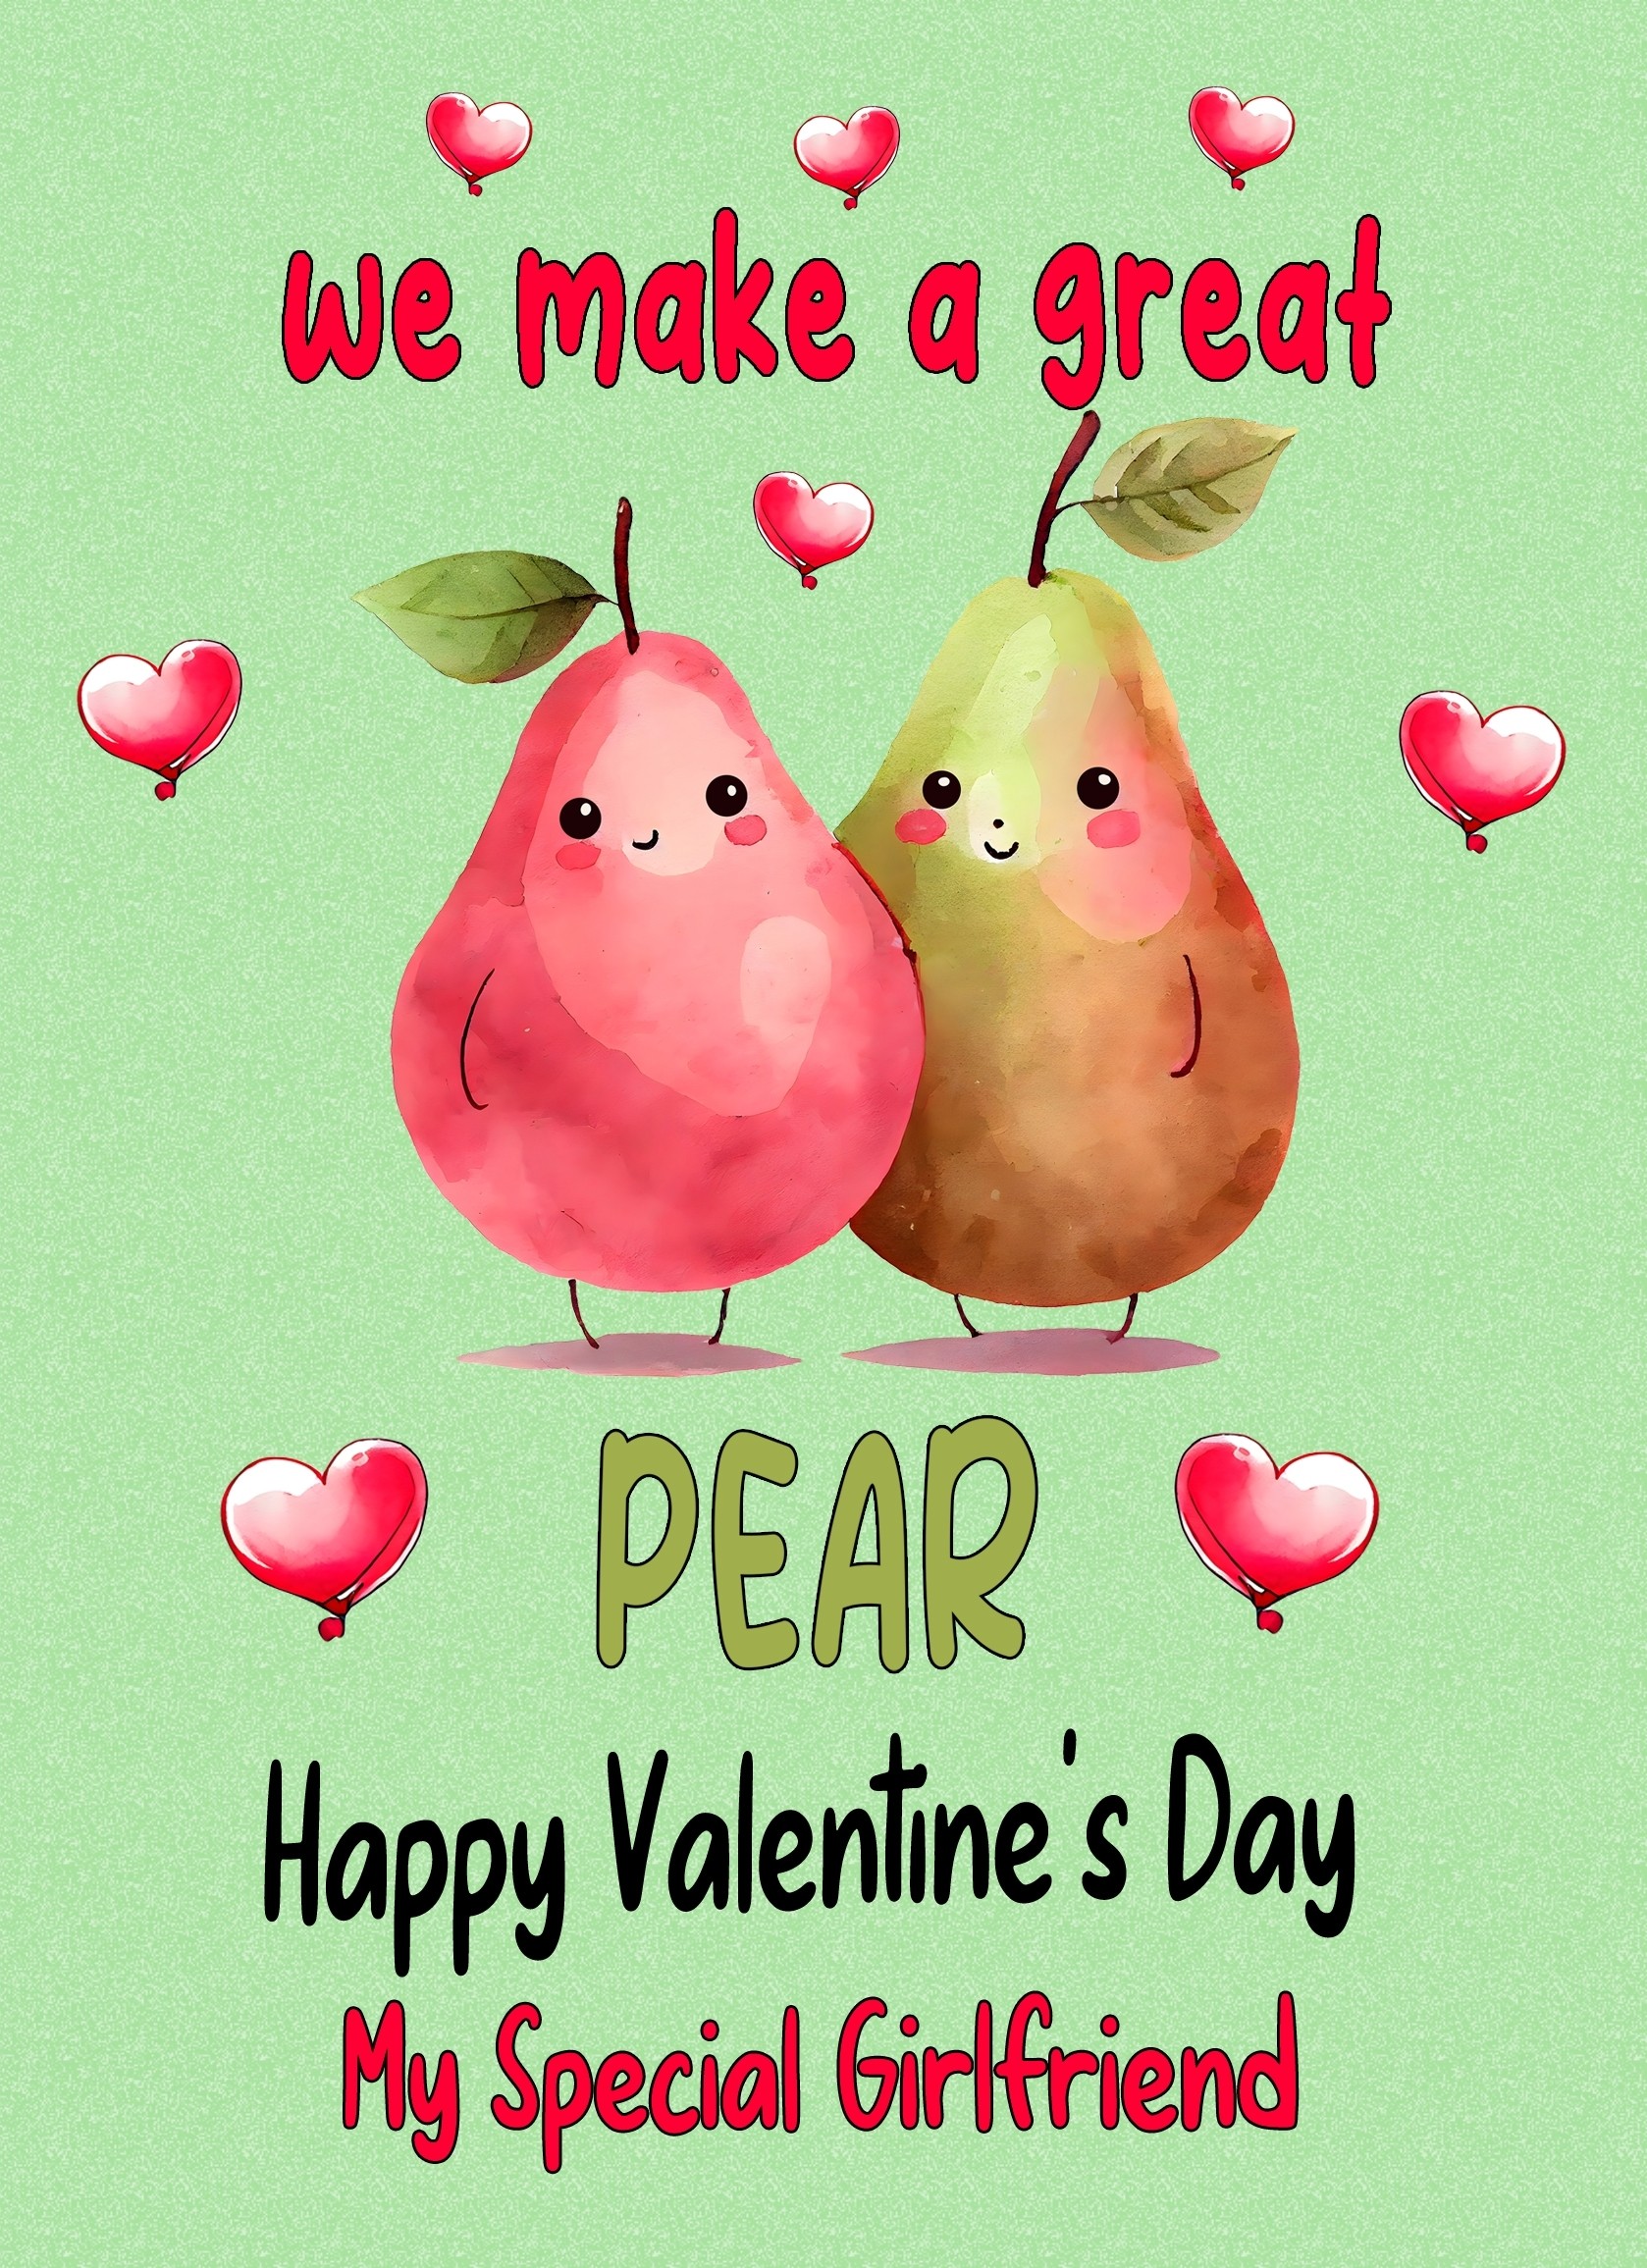 Funny Pun Valentines Day Card for Girlfriend (Great Pear)